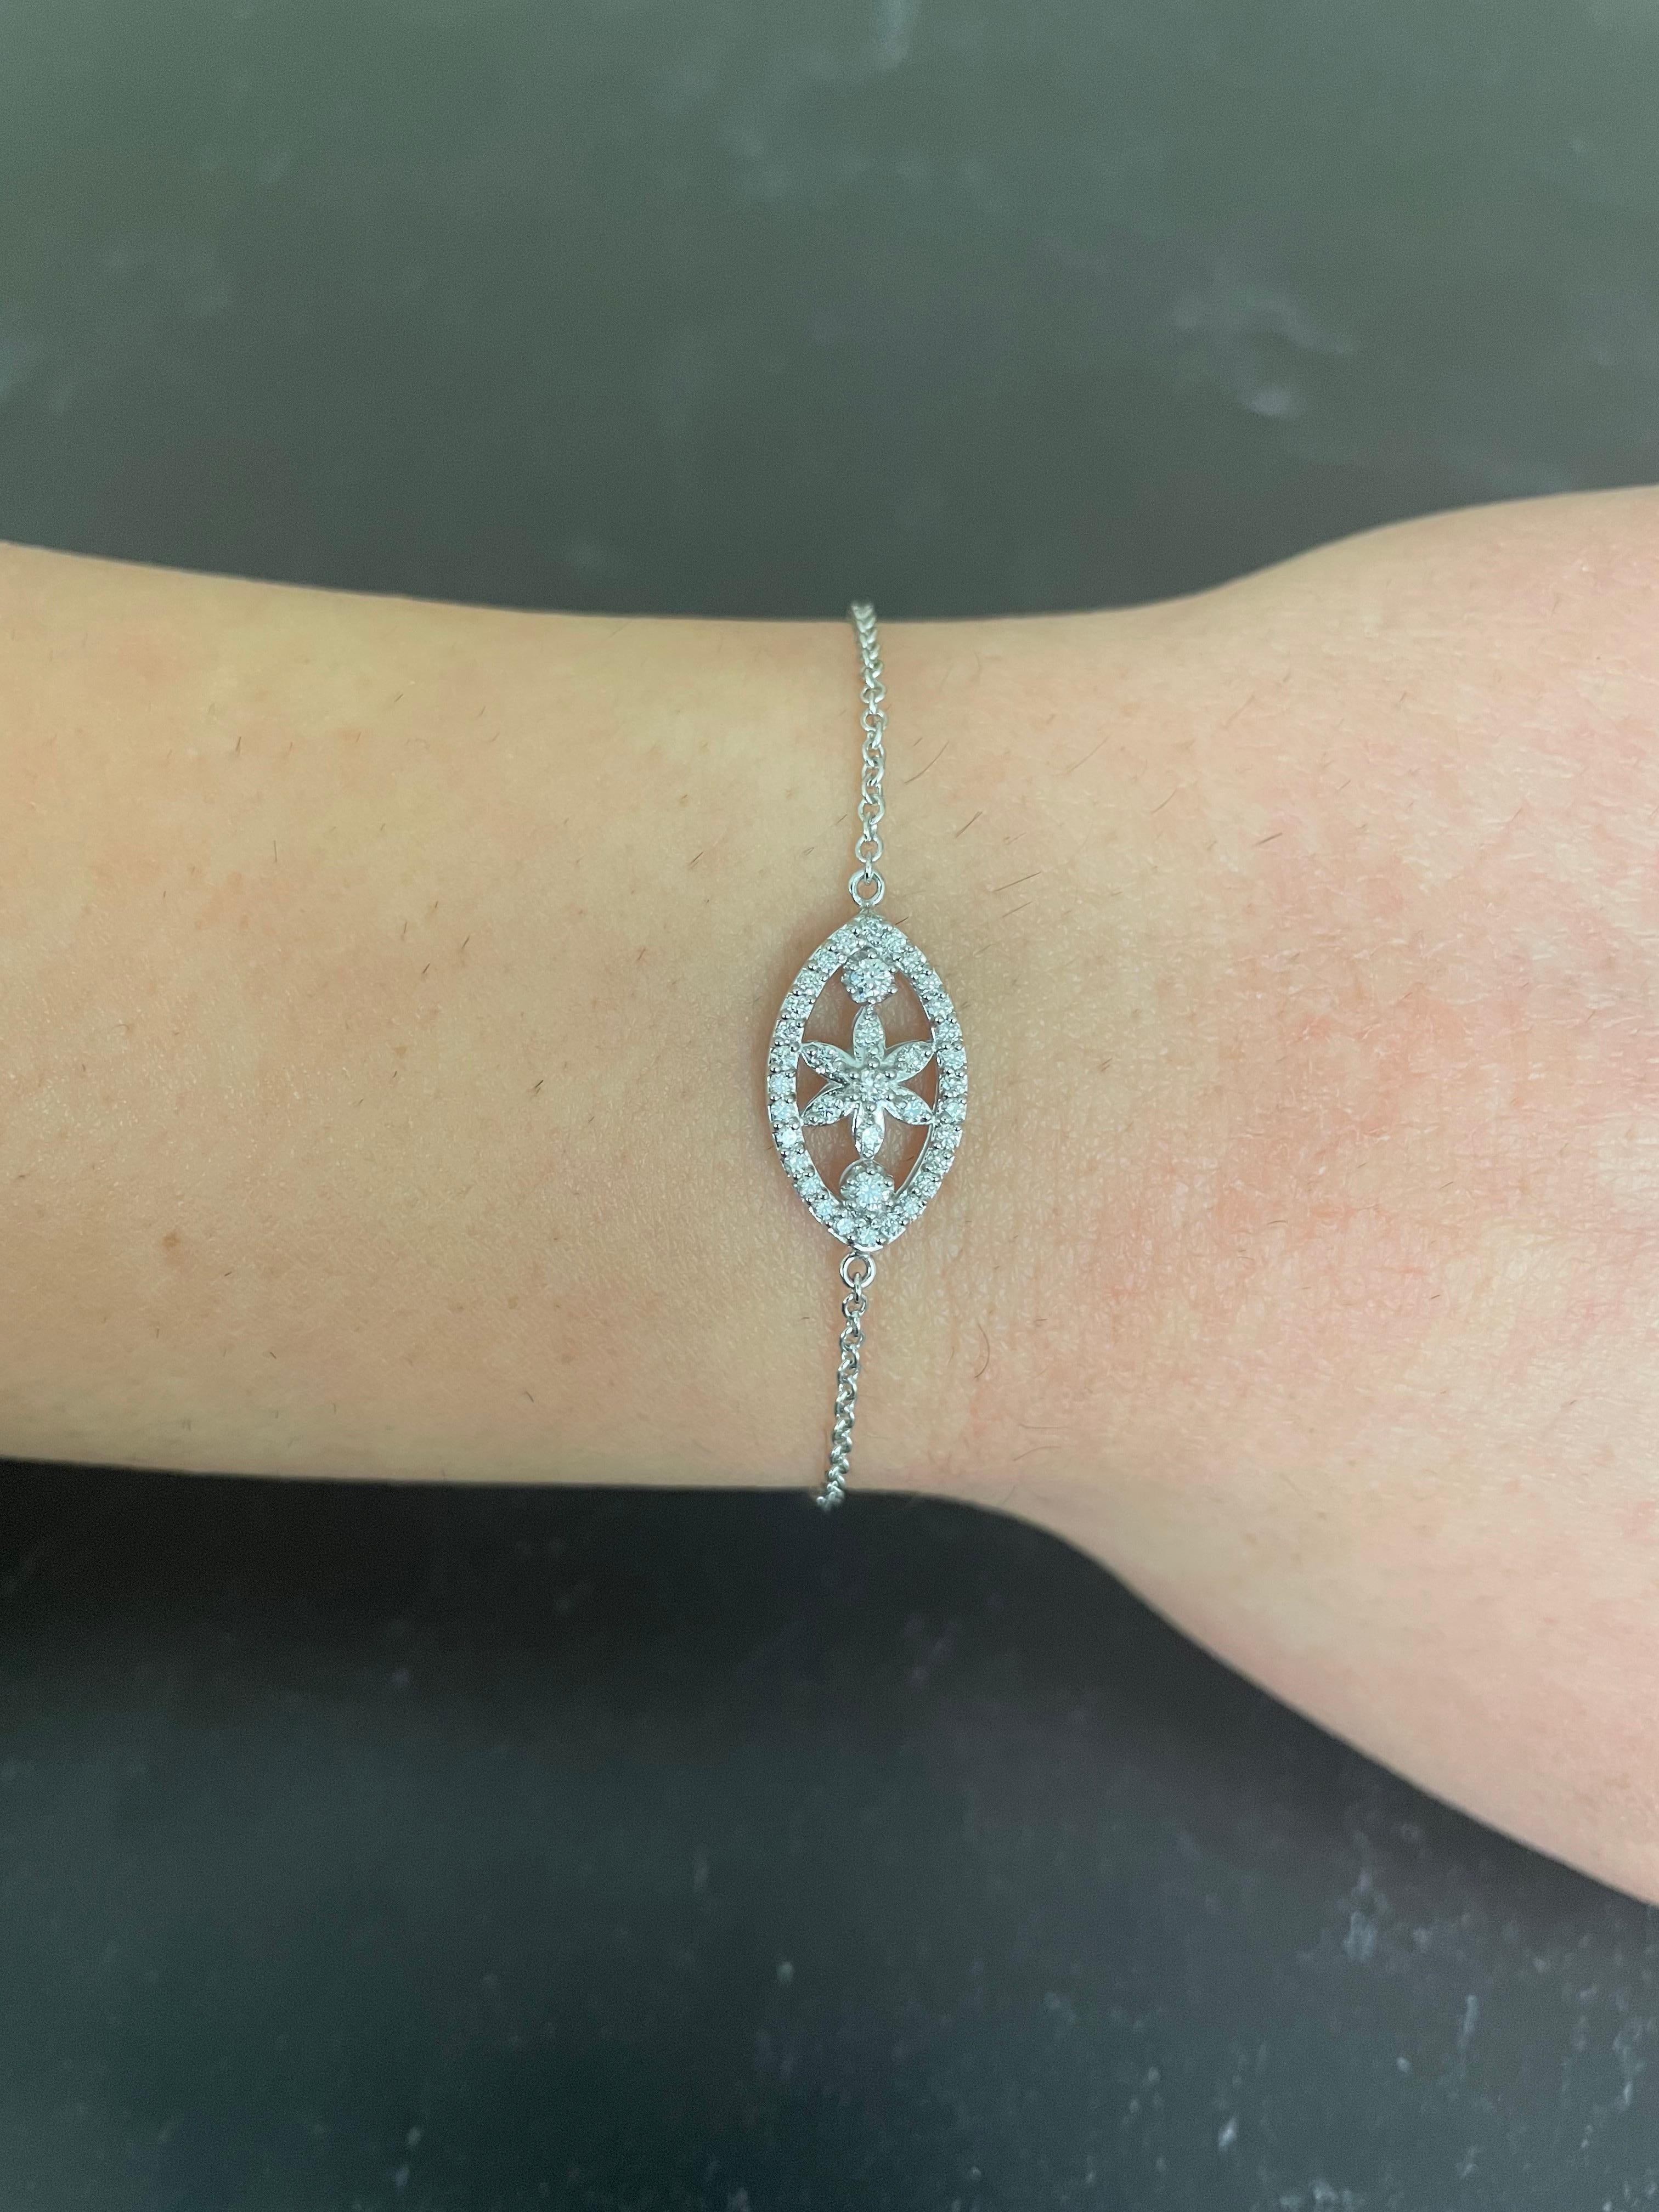 Stones: 37 Round Brilliant White Diamonds at 0.40 Carats Total Weight 
Clarity: SI / Color: H-I
Metal: 14K White Gold
Lobster Clasp with Adjustable Bolo for an adjustable fit

Fine one-of-a-kind craftsmanship meets incredible quality in this